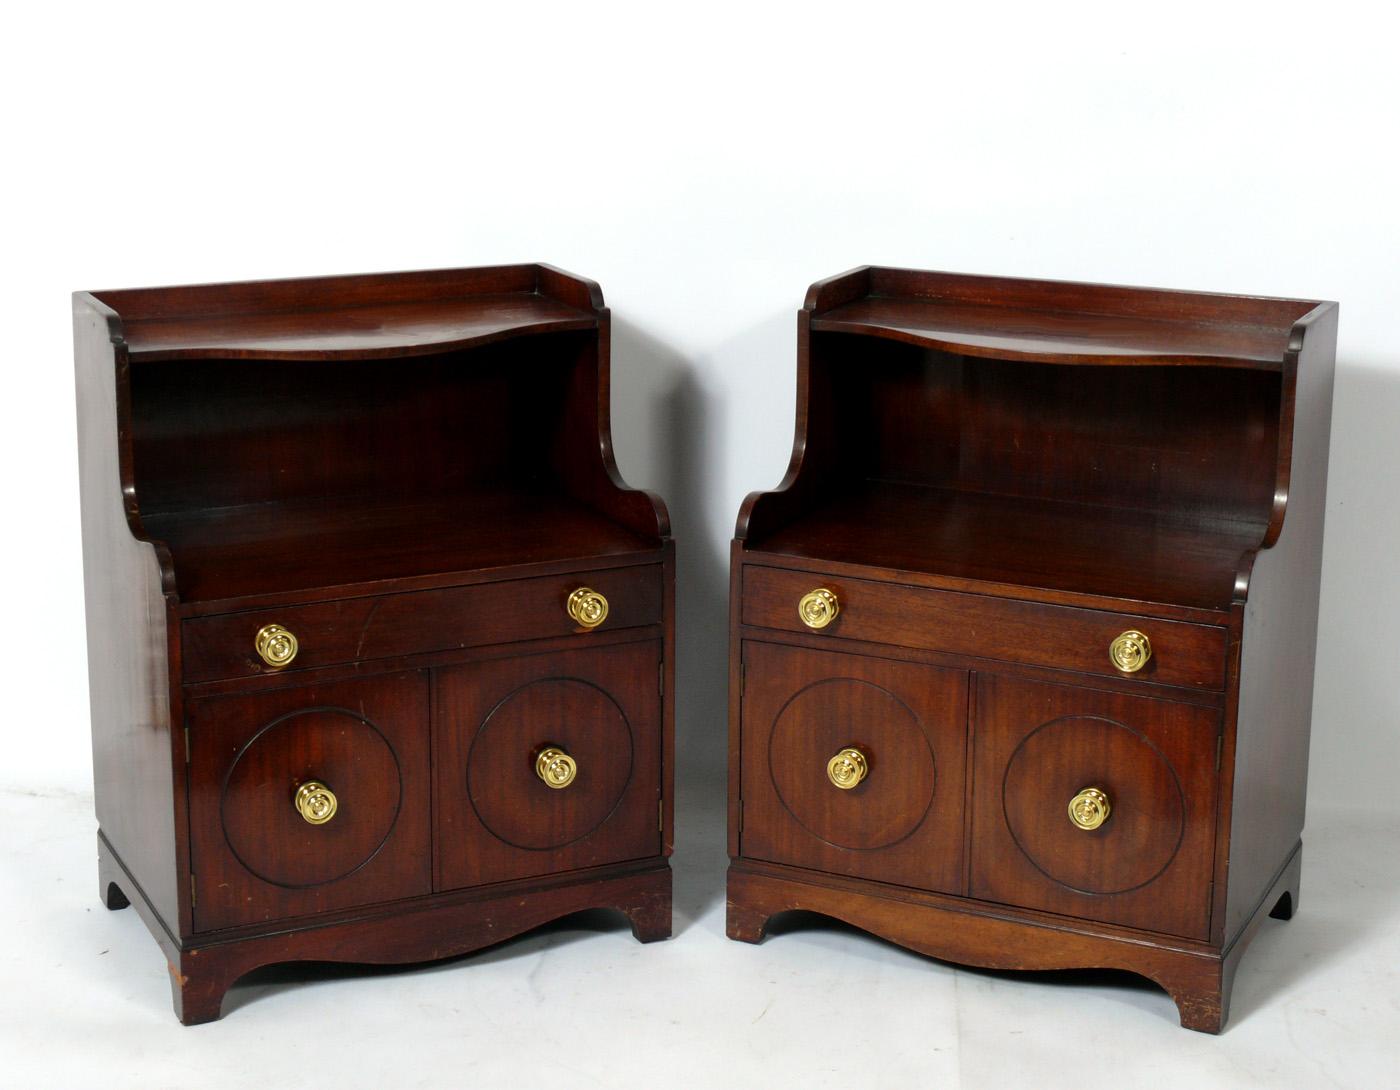 Pair of glamorous serpentine night stands or end tables, designed by Grosfeld House, circa 1940s. These are currently being refinished and can be completed in your choice of color. Choose any stain color, or really bump up the glamour factor with a